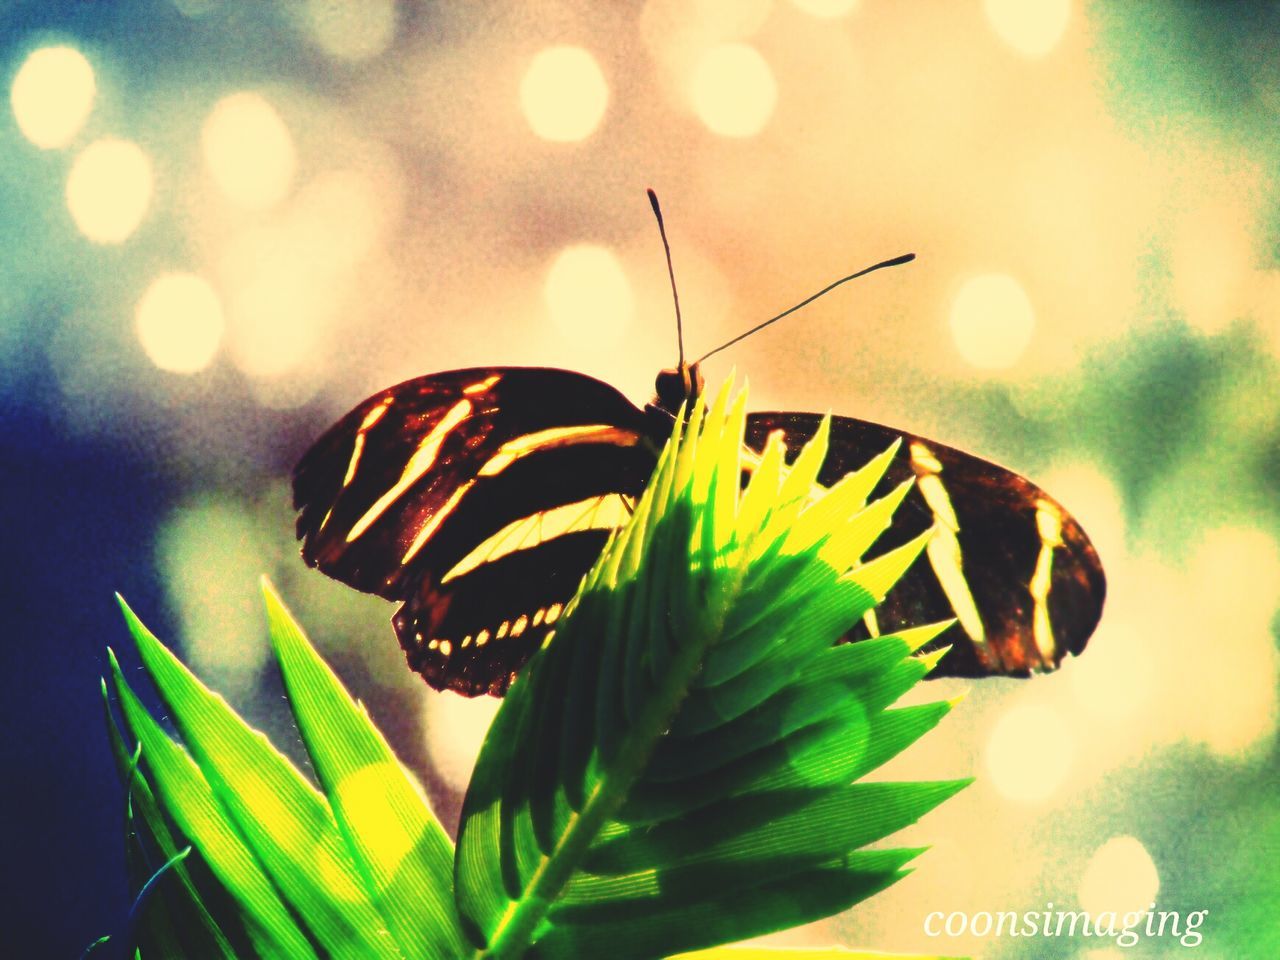 close-up, insect, one animal, focus on foreground, leaf, animals in the wild, animal themes, butterfly - insect, plant, butterfly, nature, green color, growth, wildlife, animal markings, natural pattern, beauty in nature, outdoors, no people, sunlight